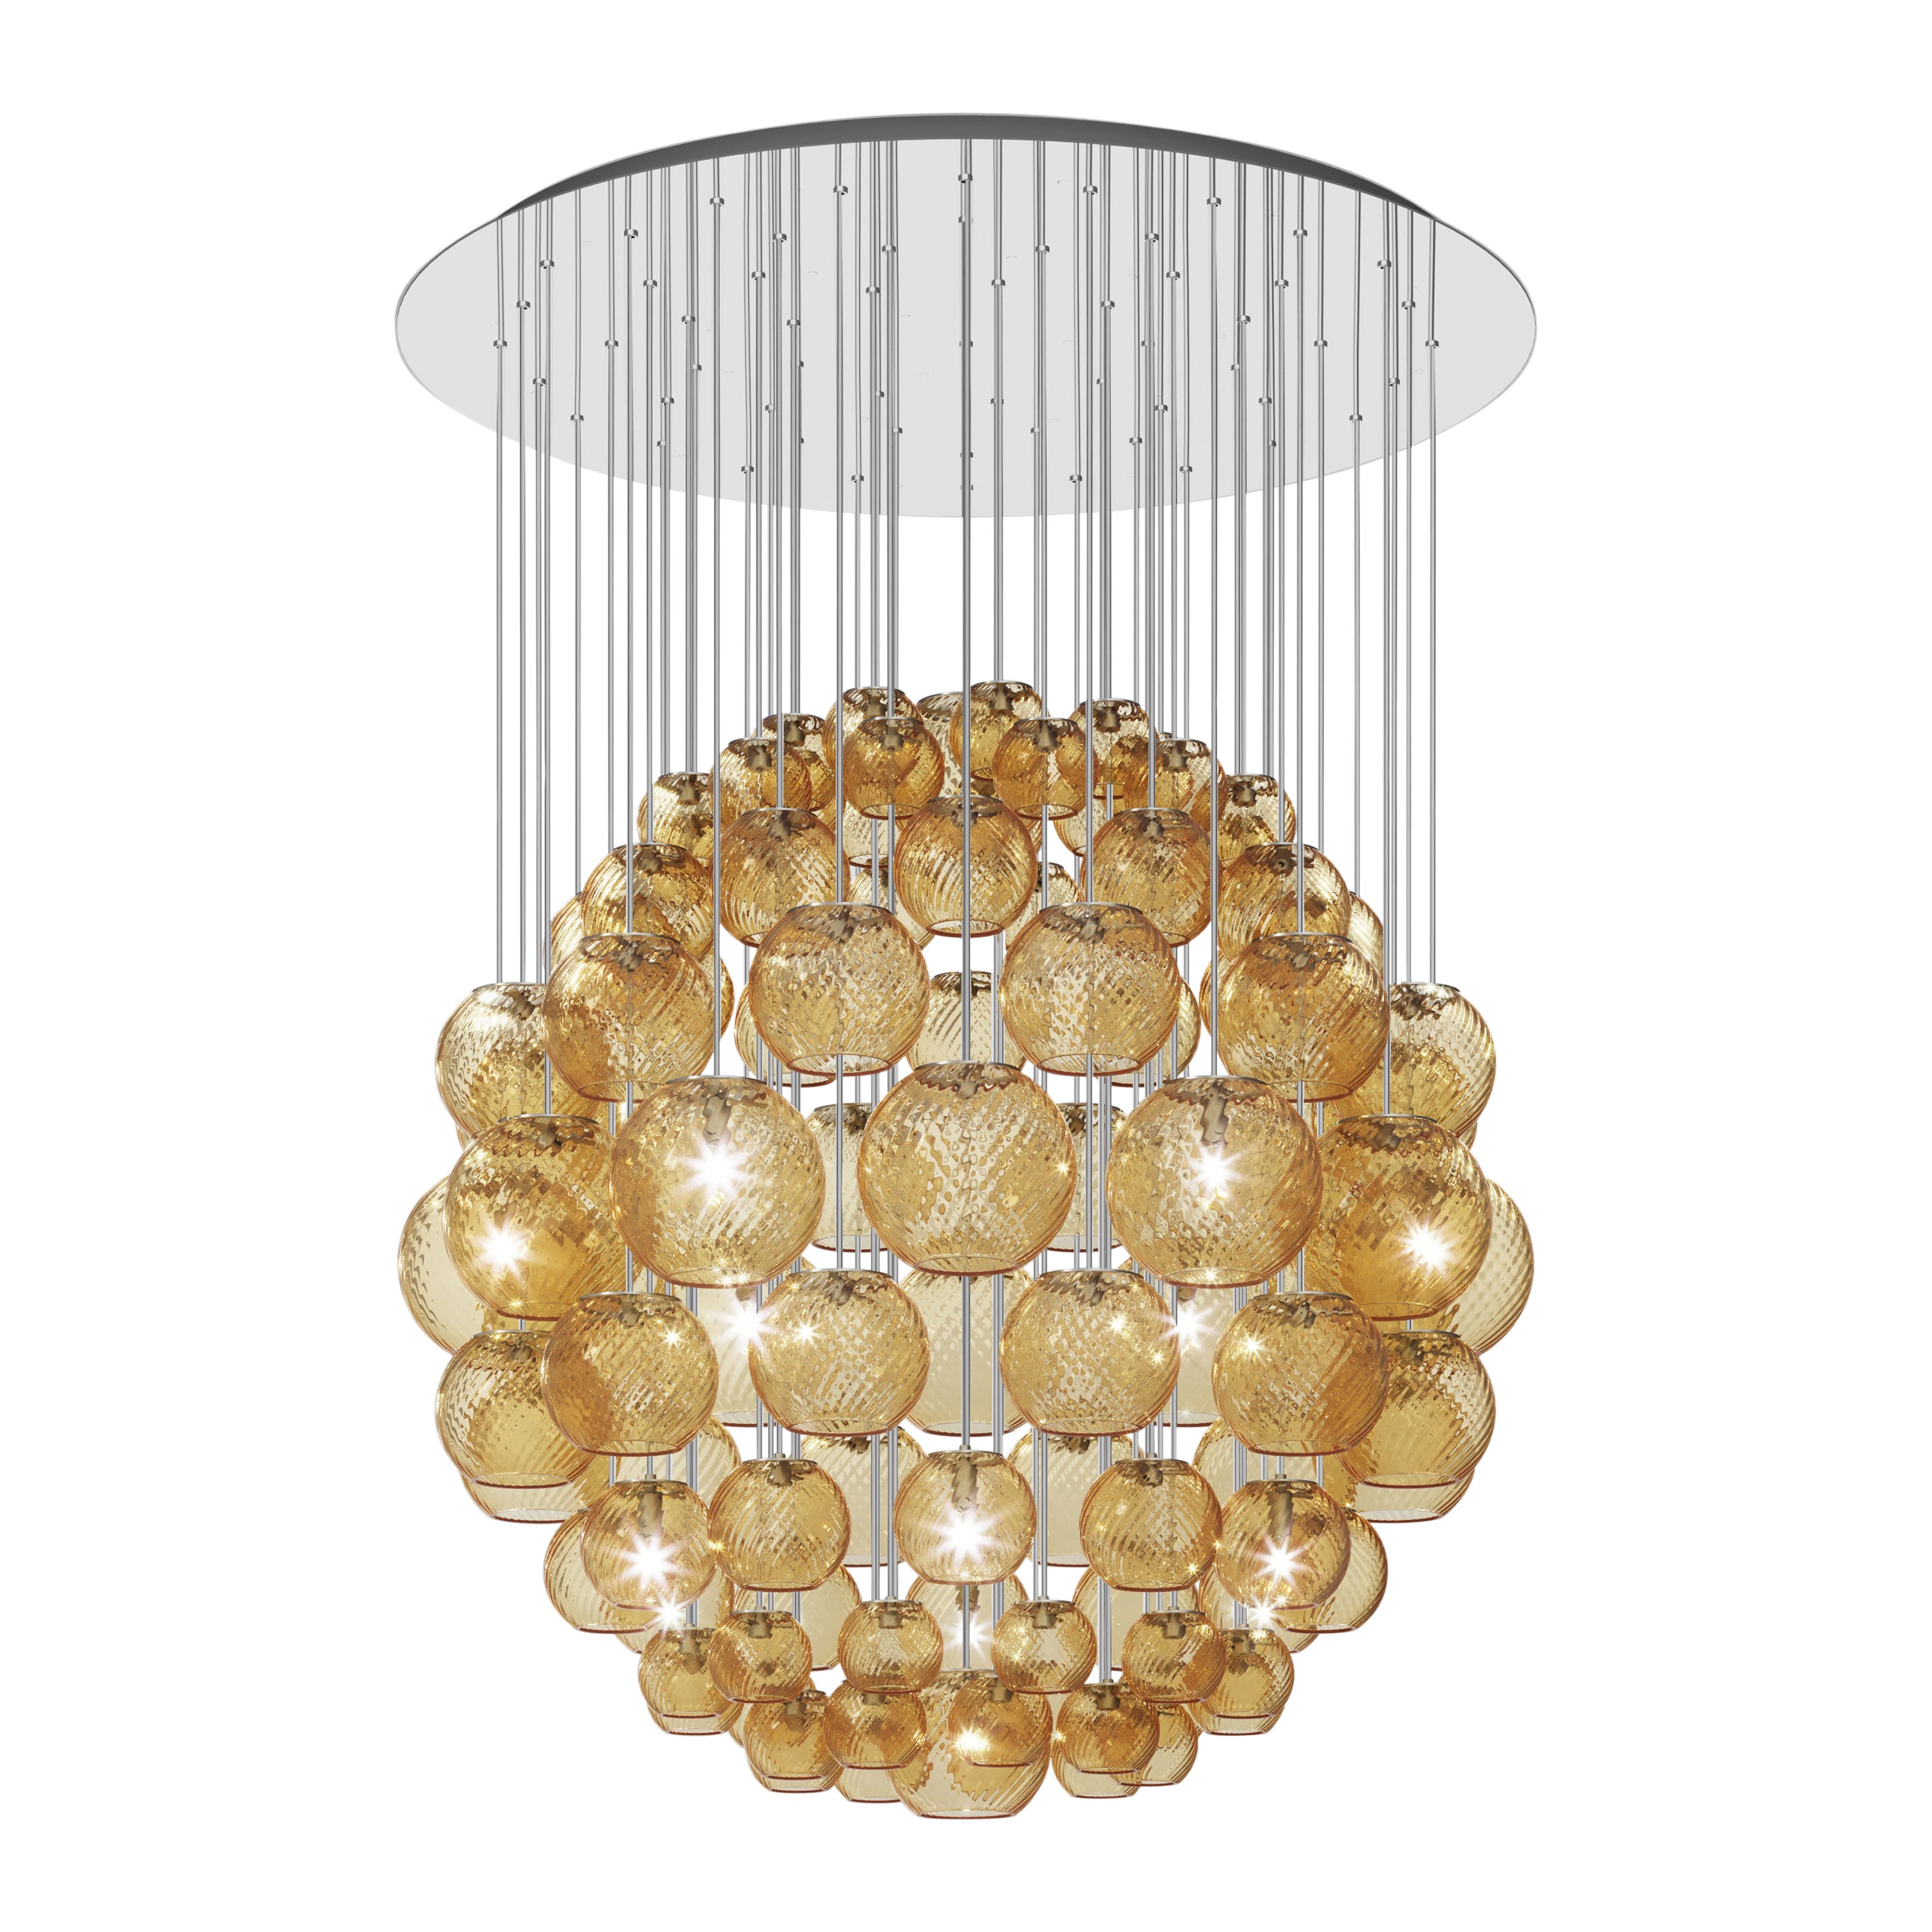 Vistosi Pendant Light in Amber Striped Glass And Mirrored Steel Frame For Sale